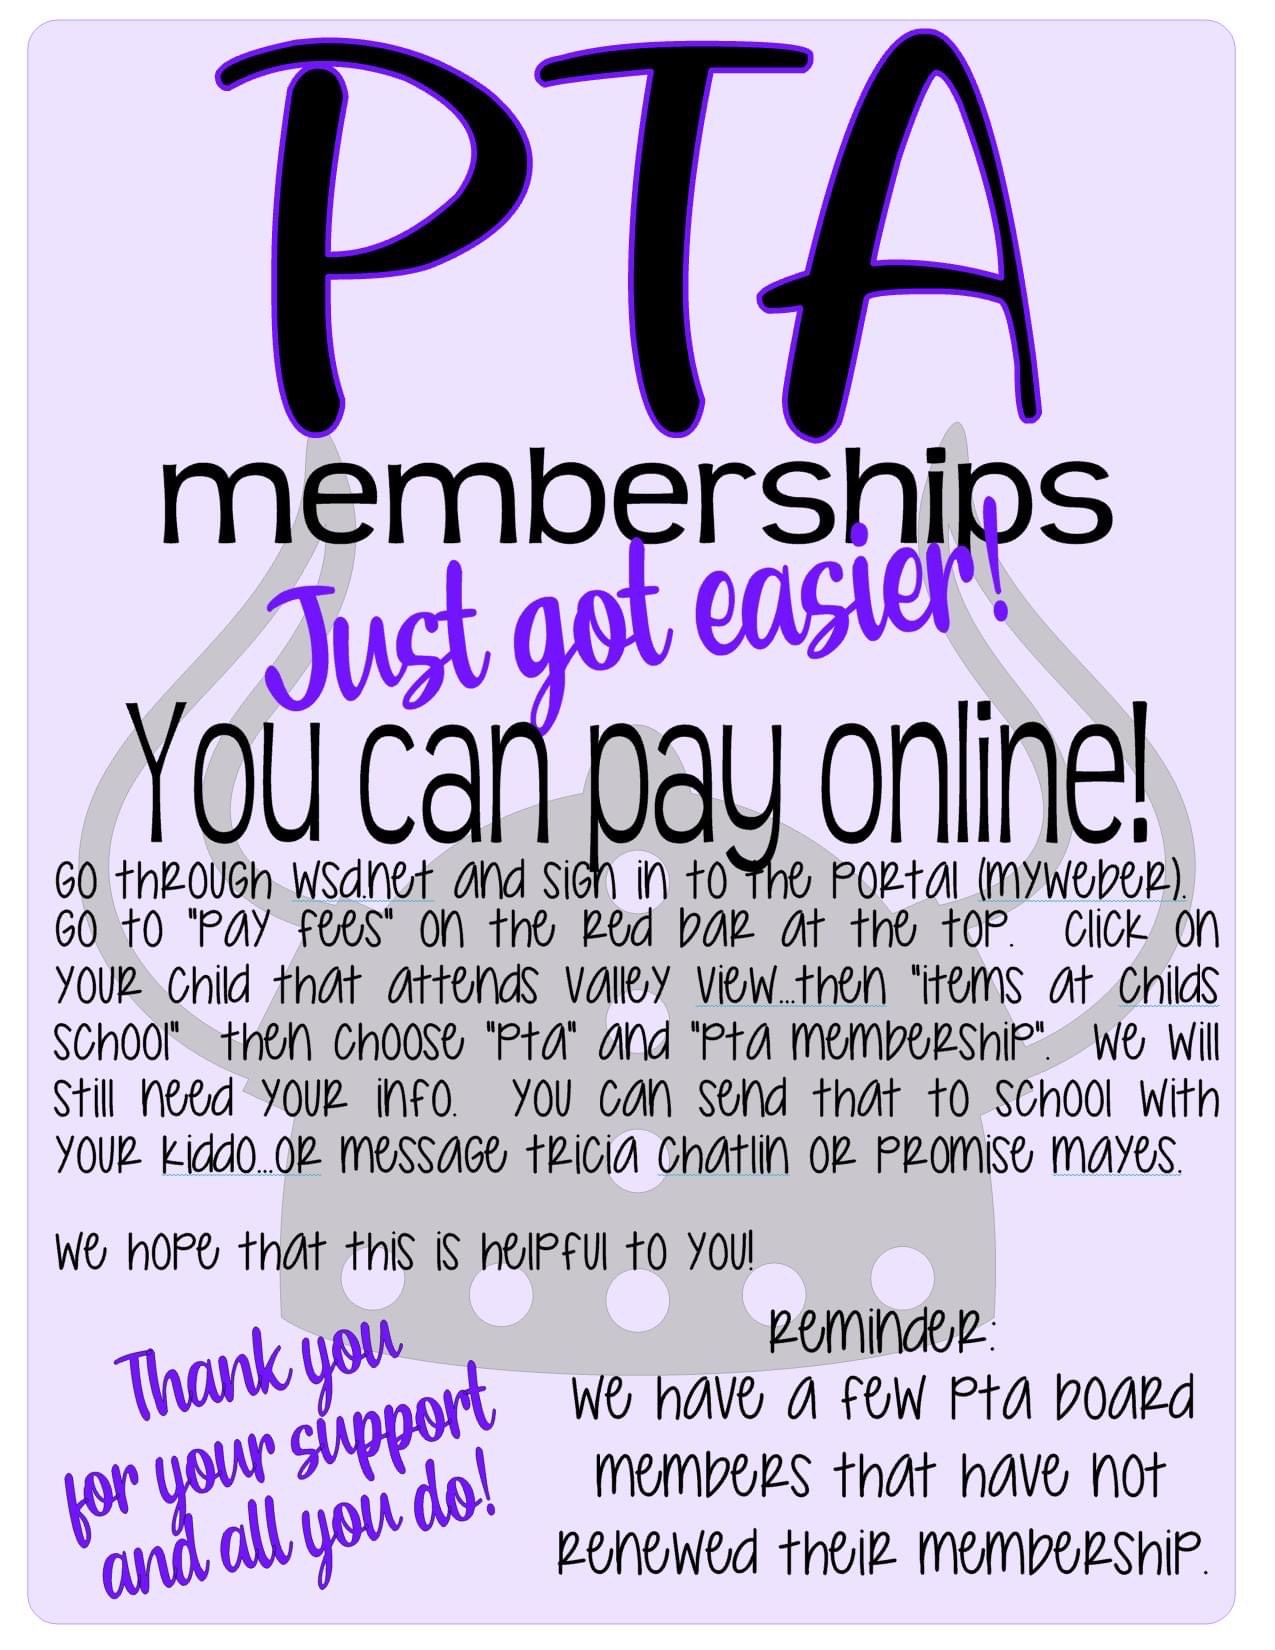 PTA Memberships: Just got easier!  You can pay online!  Sign in on the Portal.  Go to "pay fees" on the red bar at the top.  Click on your child's name that attends Valley View.  Choose items at your childs school.  Then choose PTA and PTA membership.  